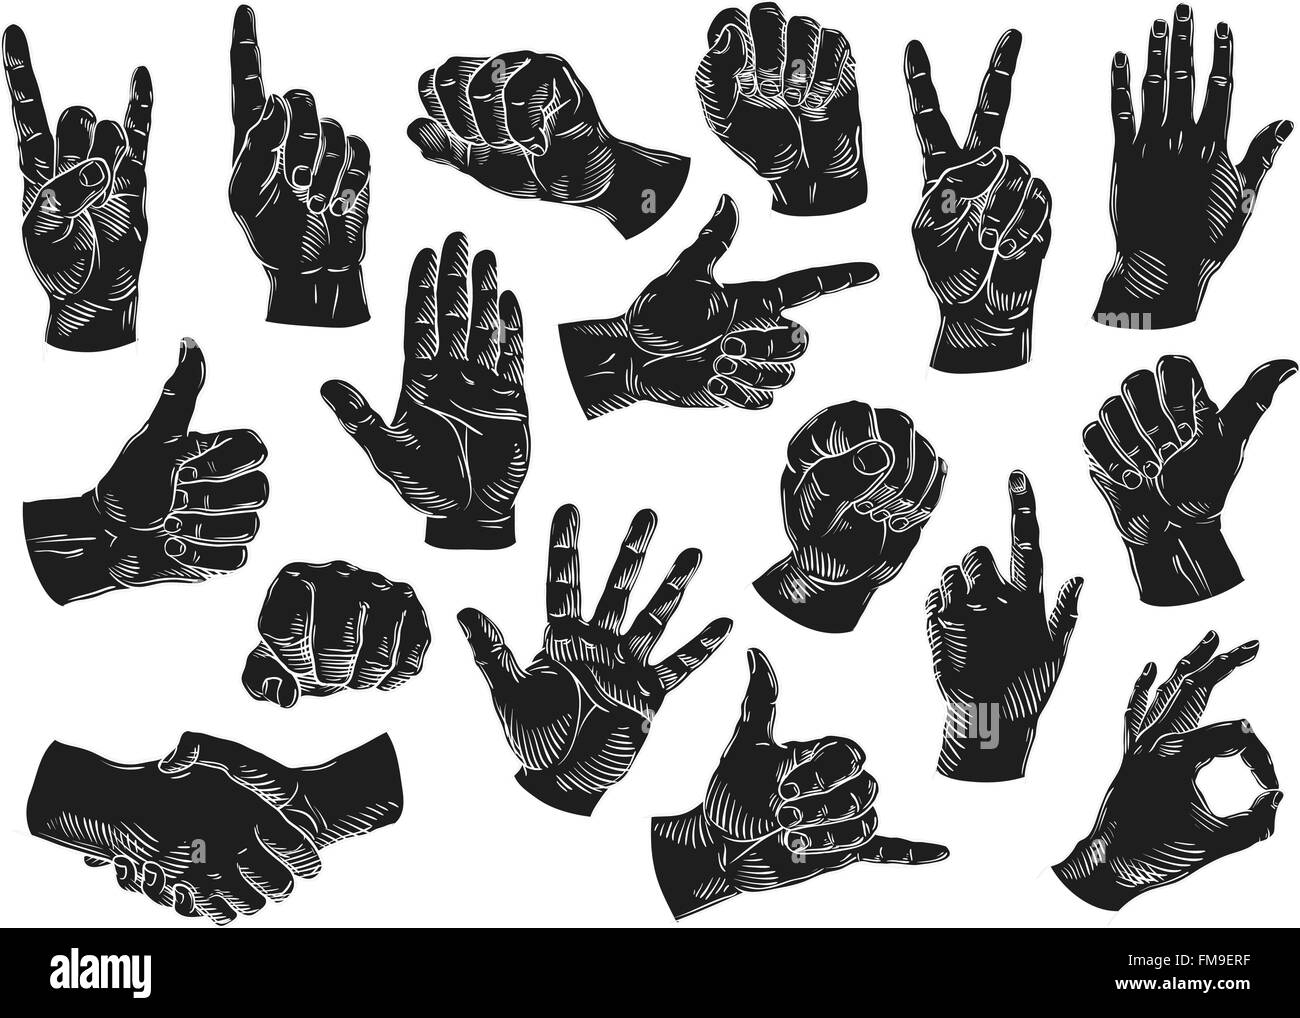 hands icons set. vector illustration Stock Vector